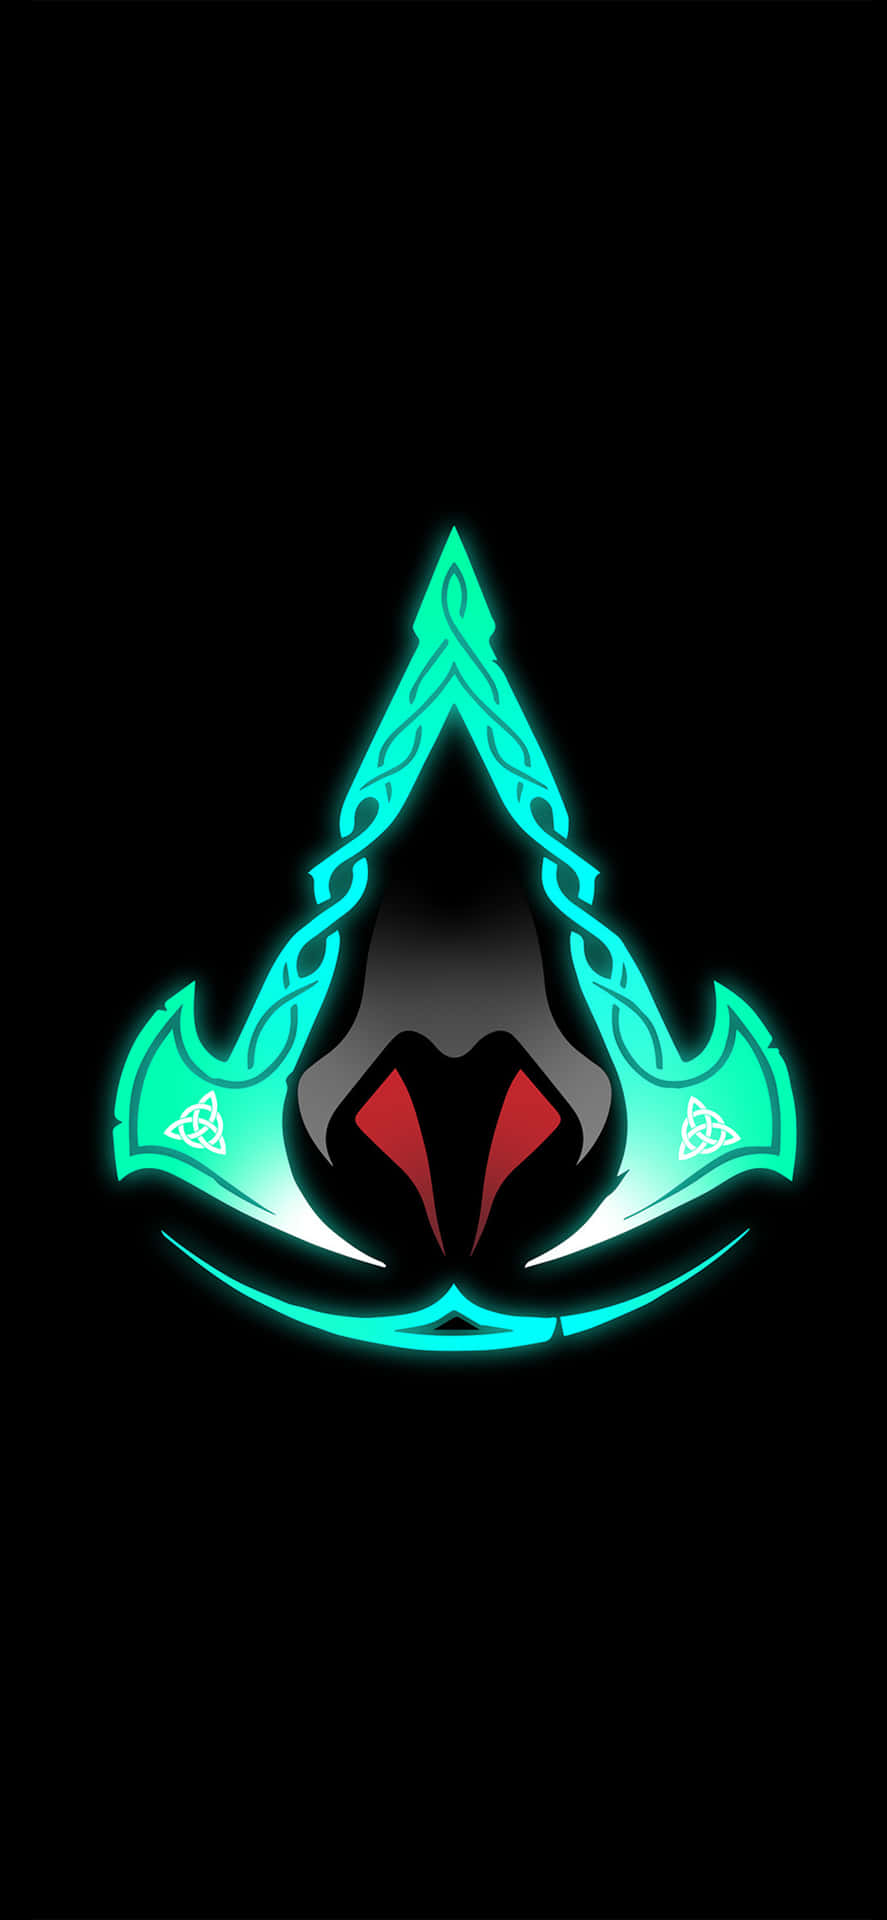 Assassin's Creed Logo Iphone Xs Max Assassin's Creed Valhalla Background